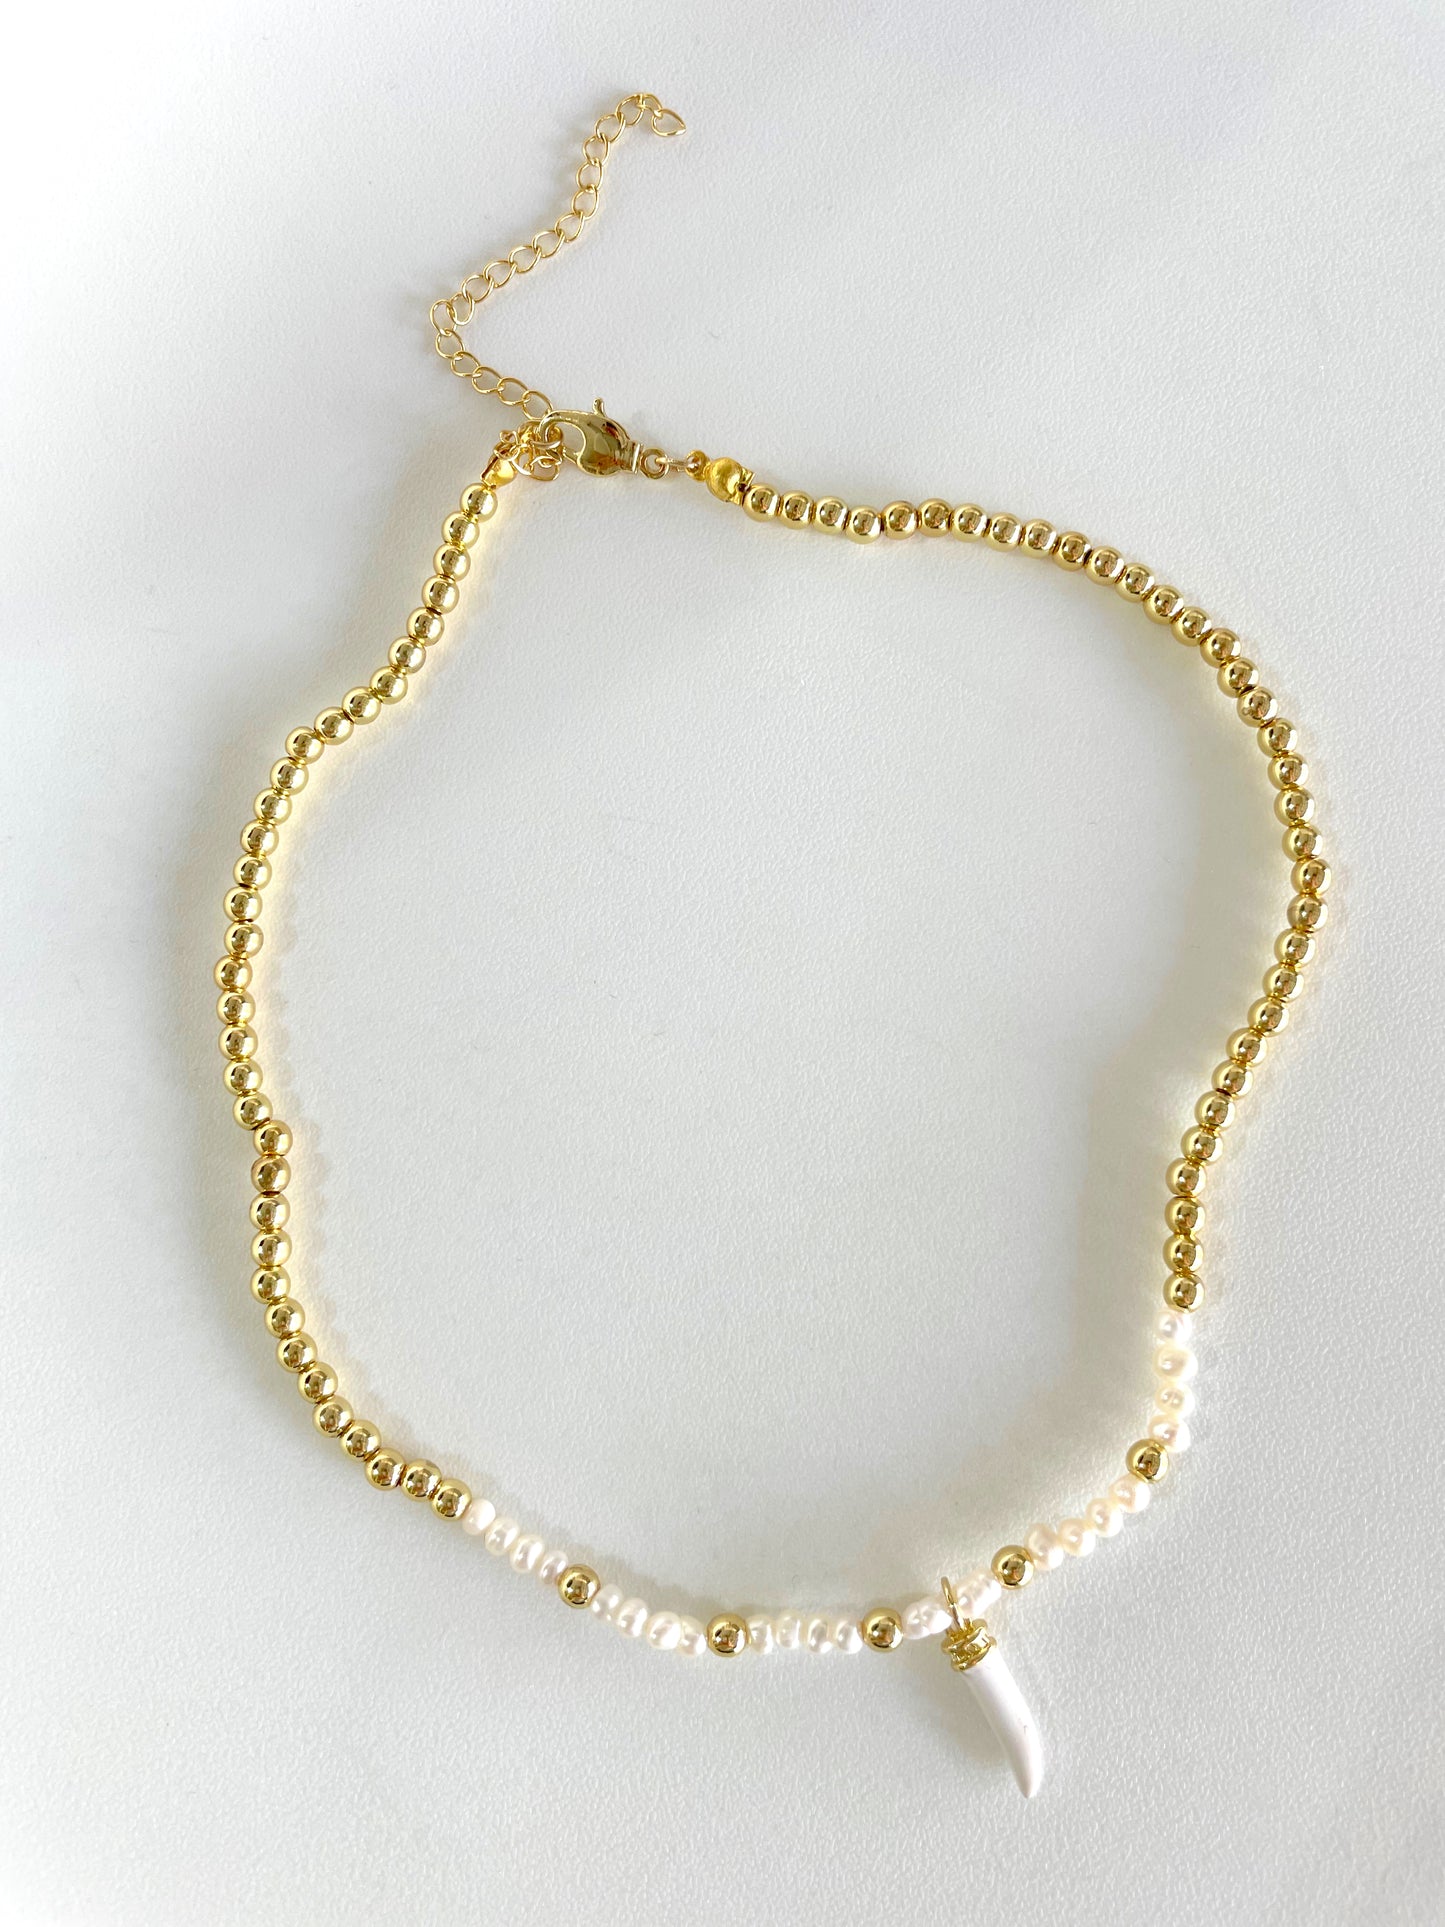 Gold beaded colored tooth necklace